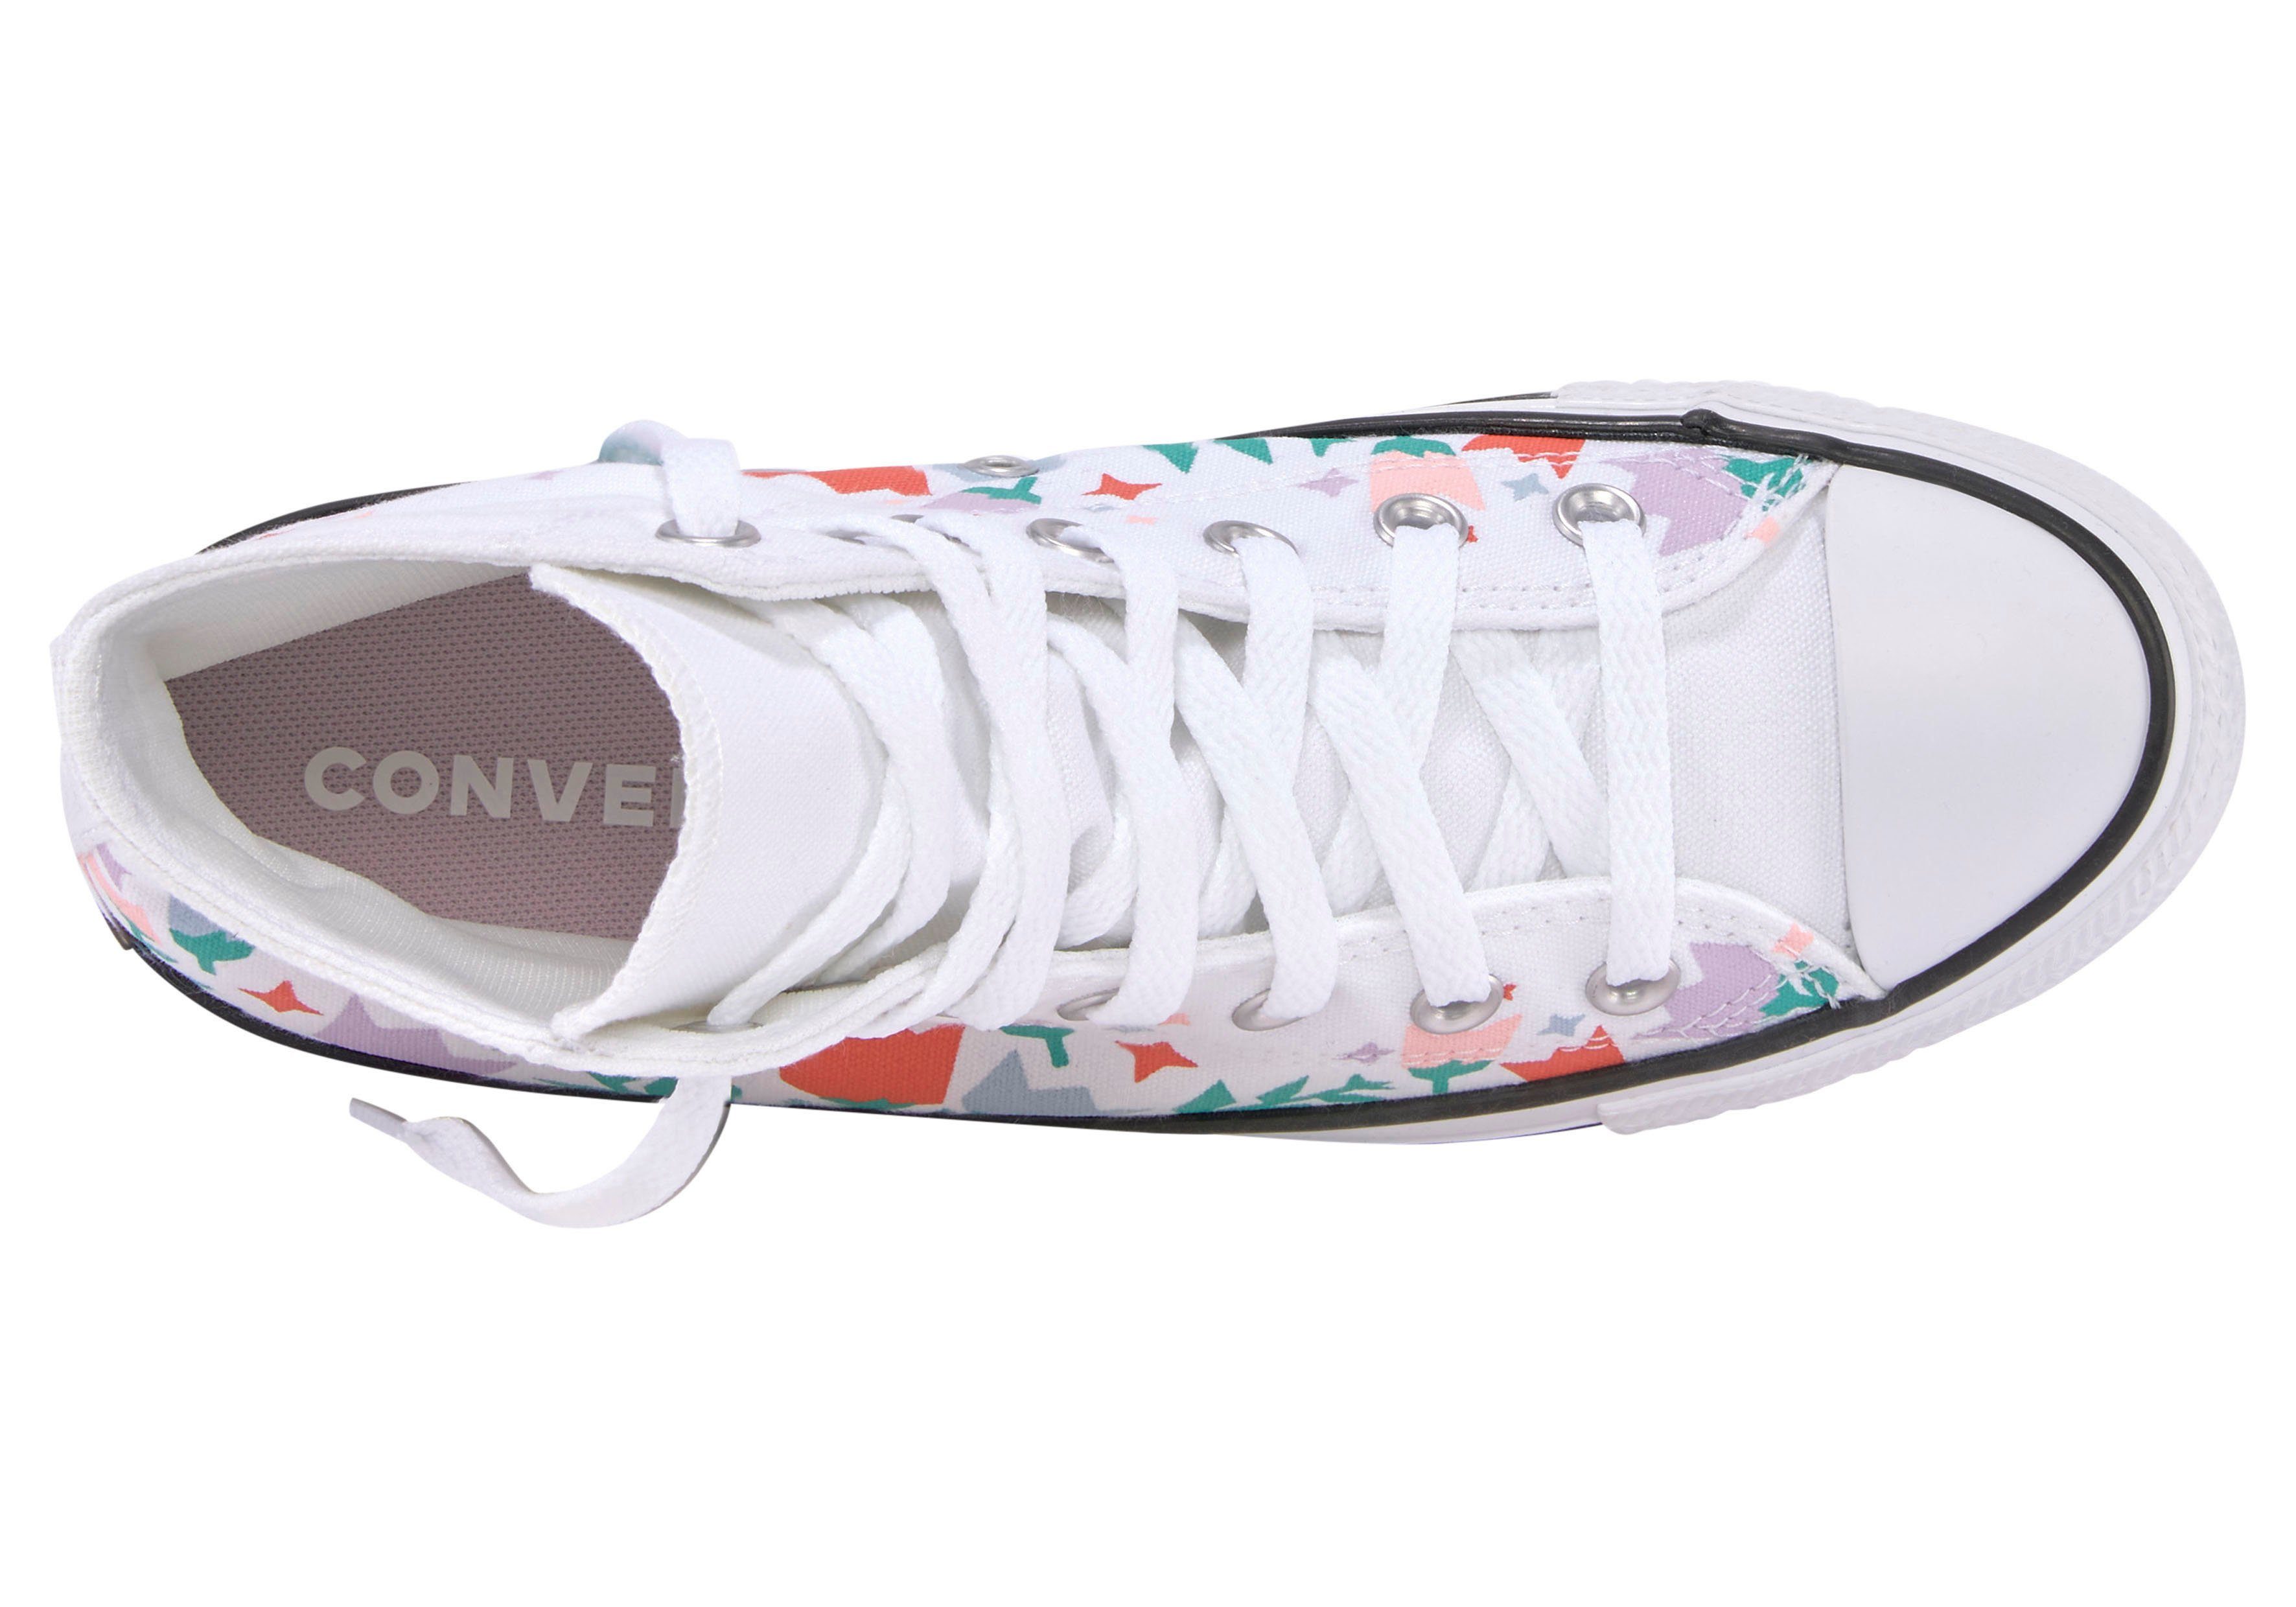 Schuhe Sneaker Converse CHUCK TAYLOR ALL STAR CRAFTED FLORALS HI Sneaker